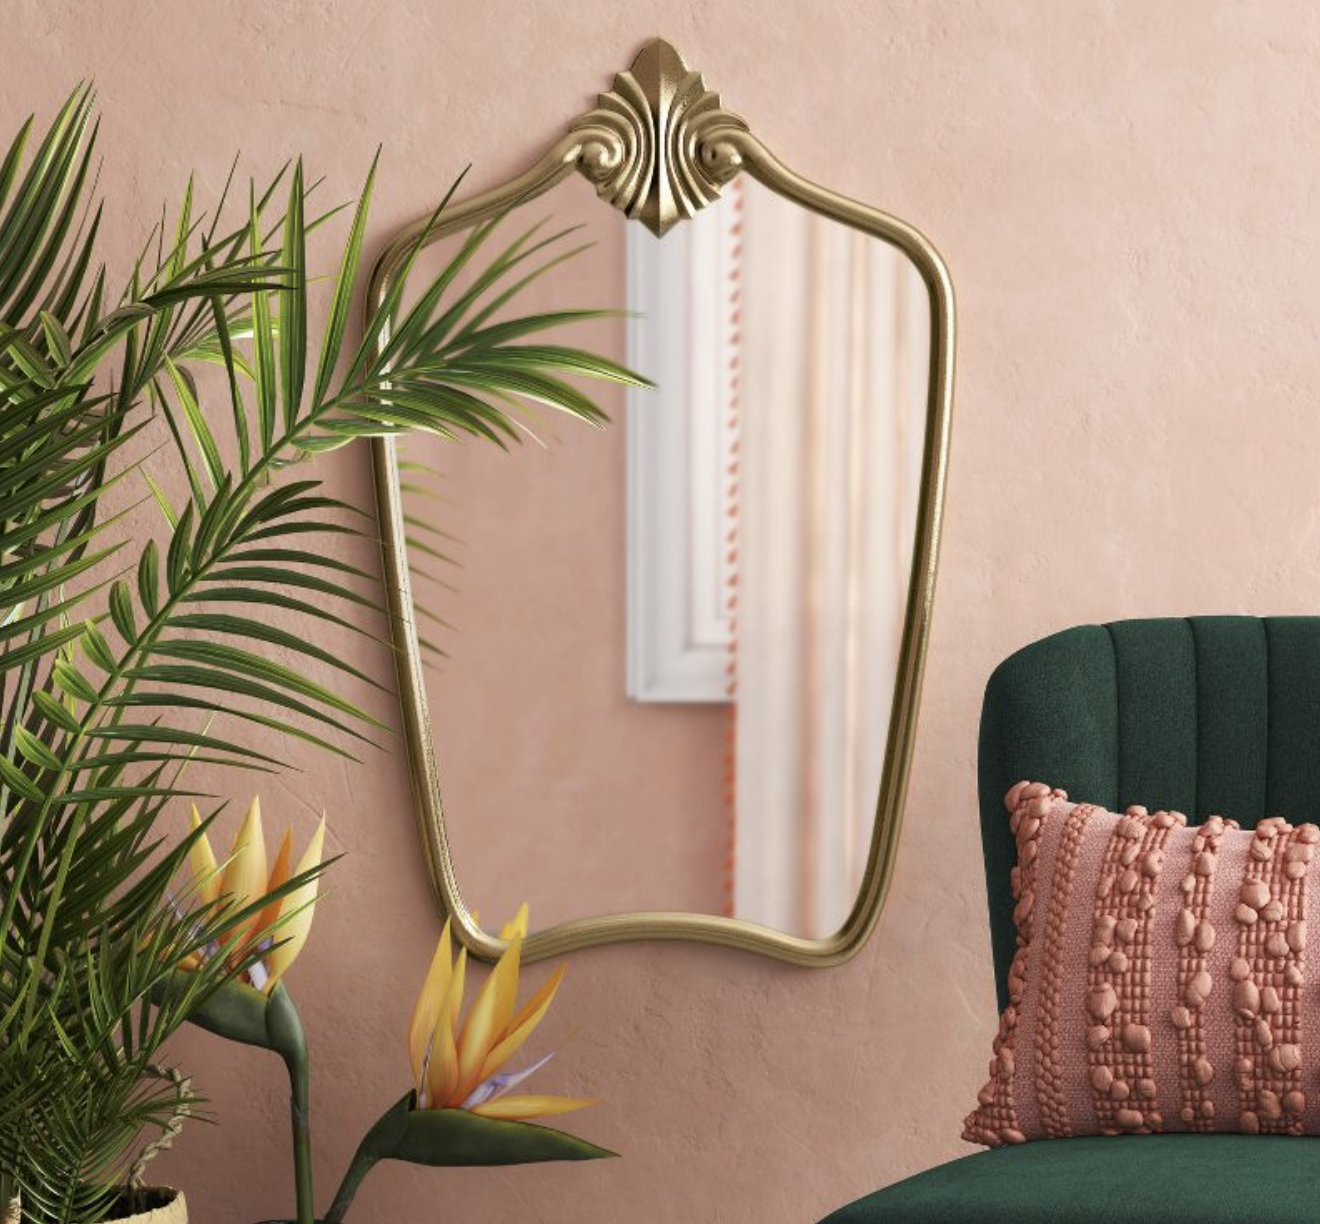 the ornate gold mirror on a wall